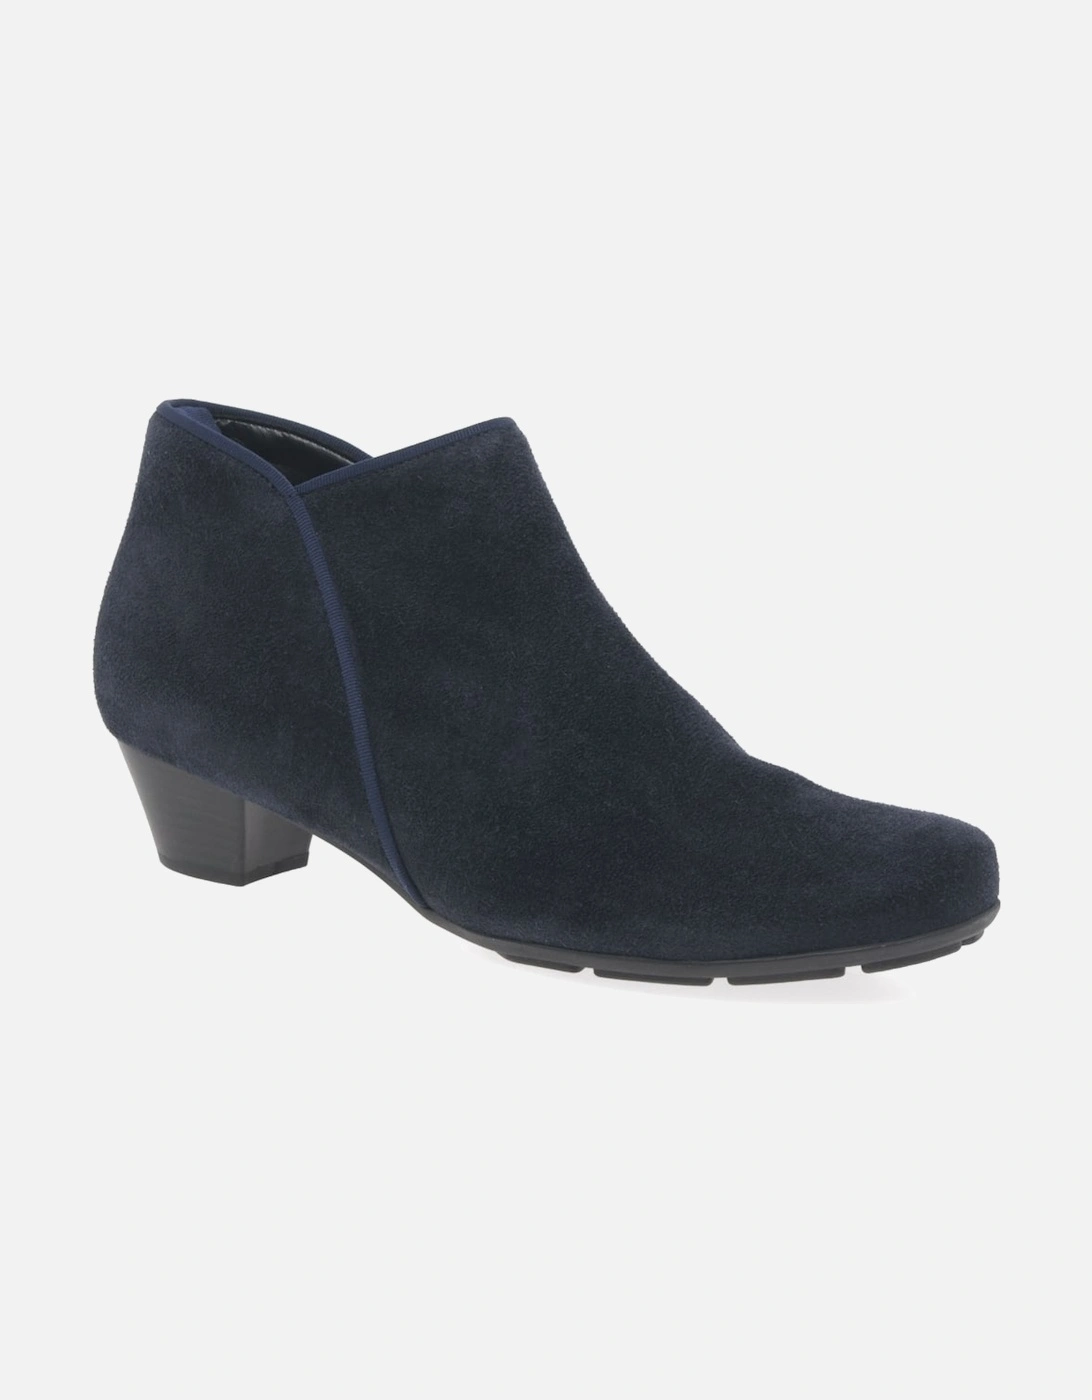 Trudy Womens Ankle Boots, 8 of 7